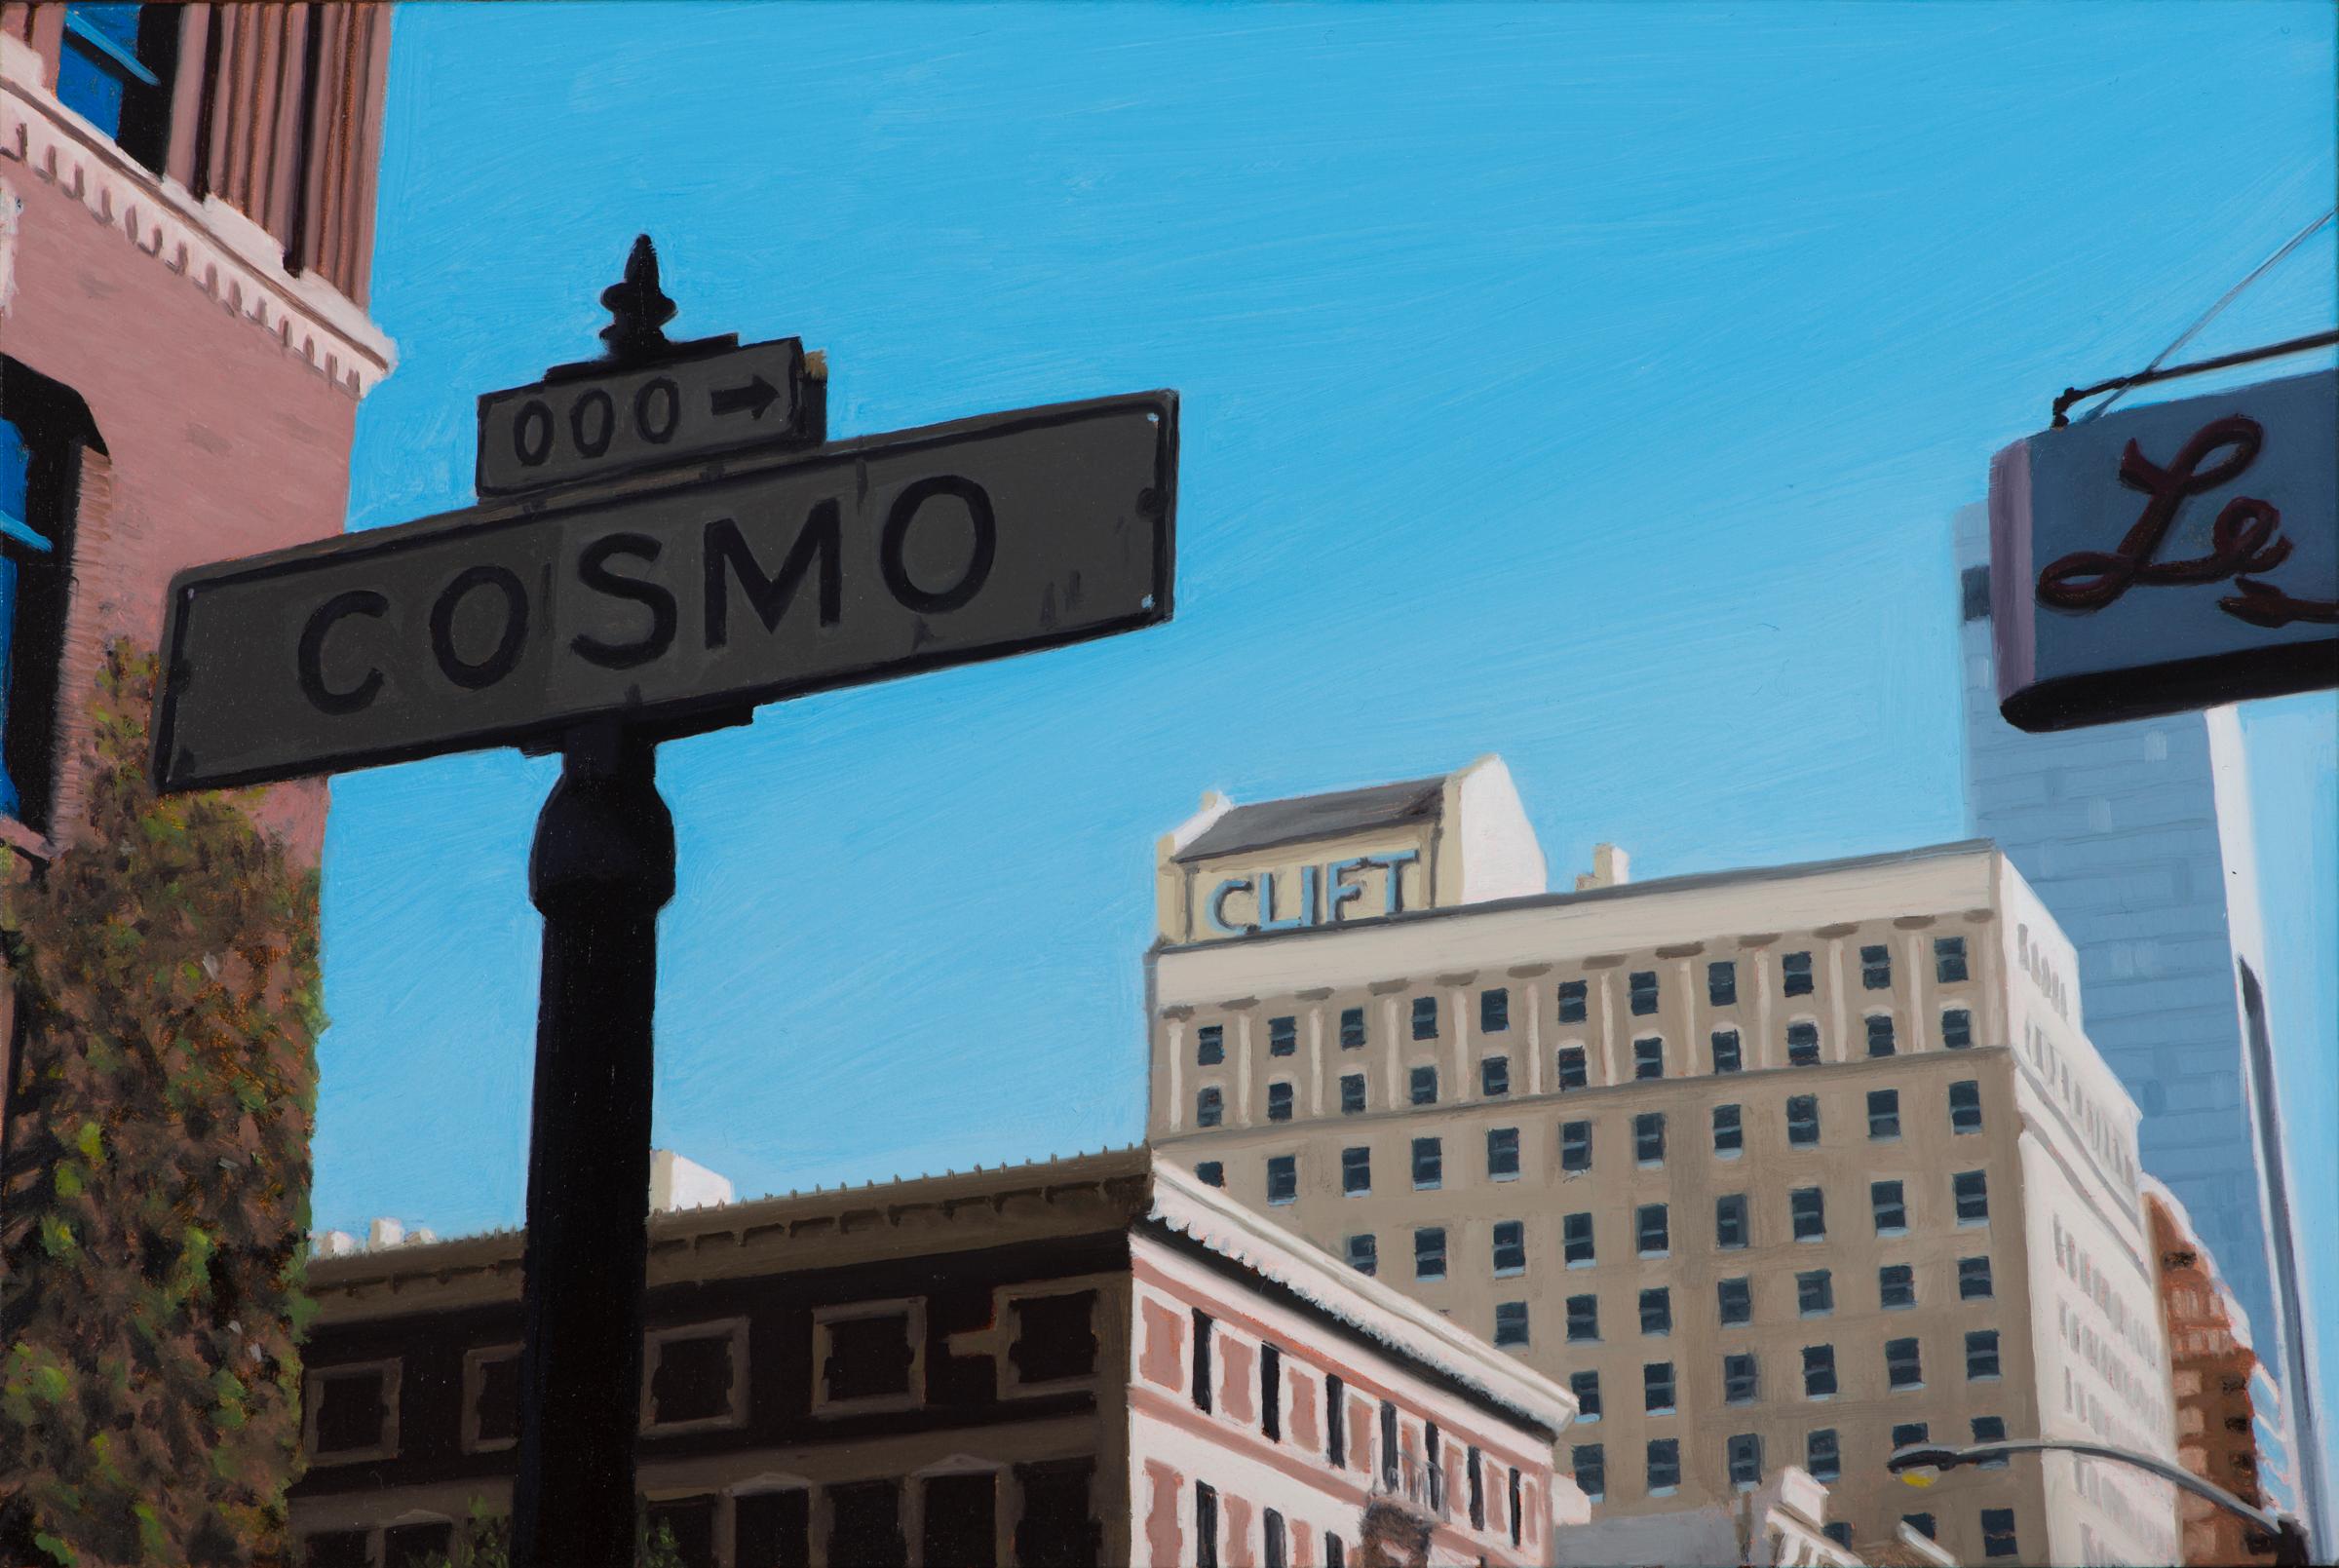 Seth Tane Landscape Painting - small scale realist painting with blue, "Cosmo, S.F.", San Francisco 